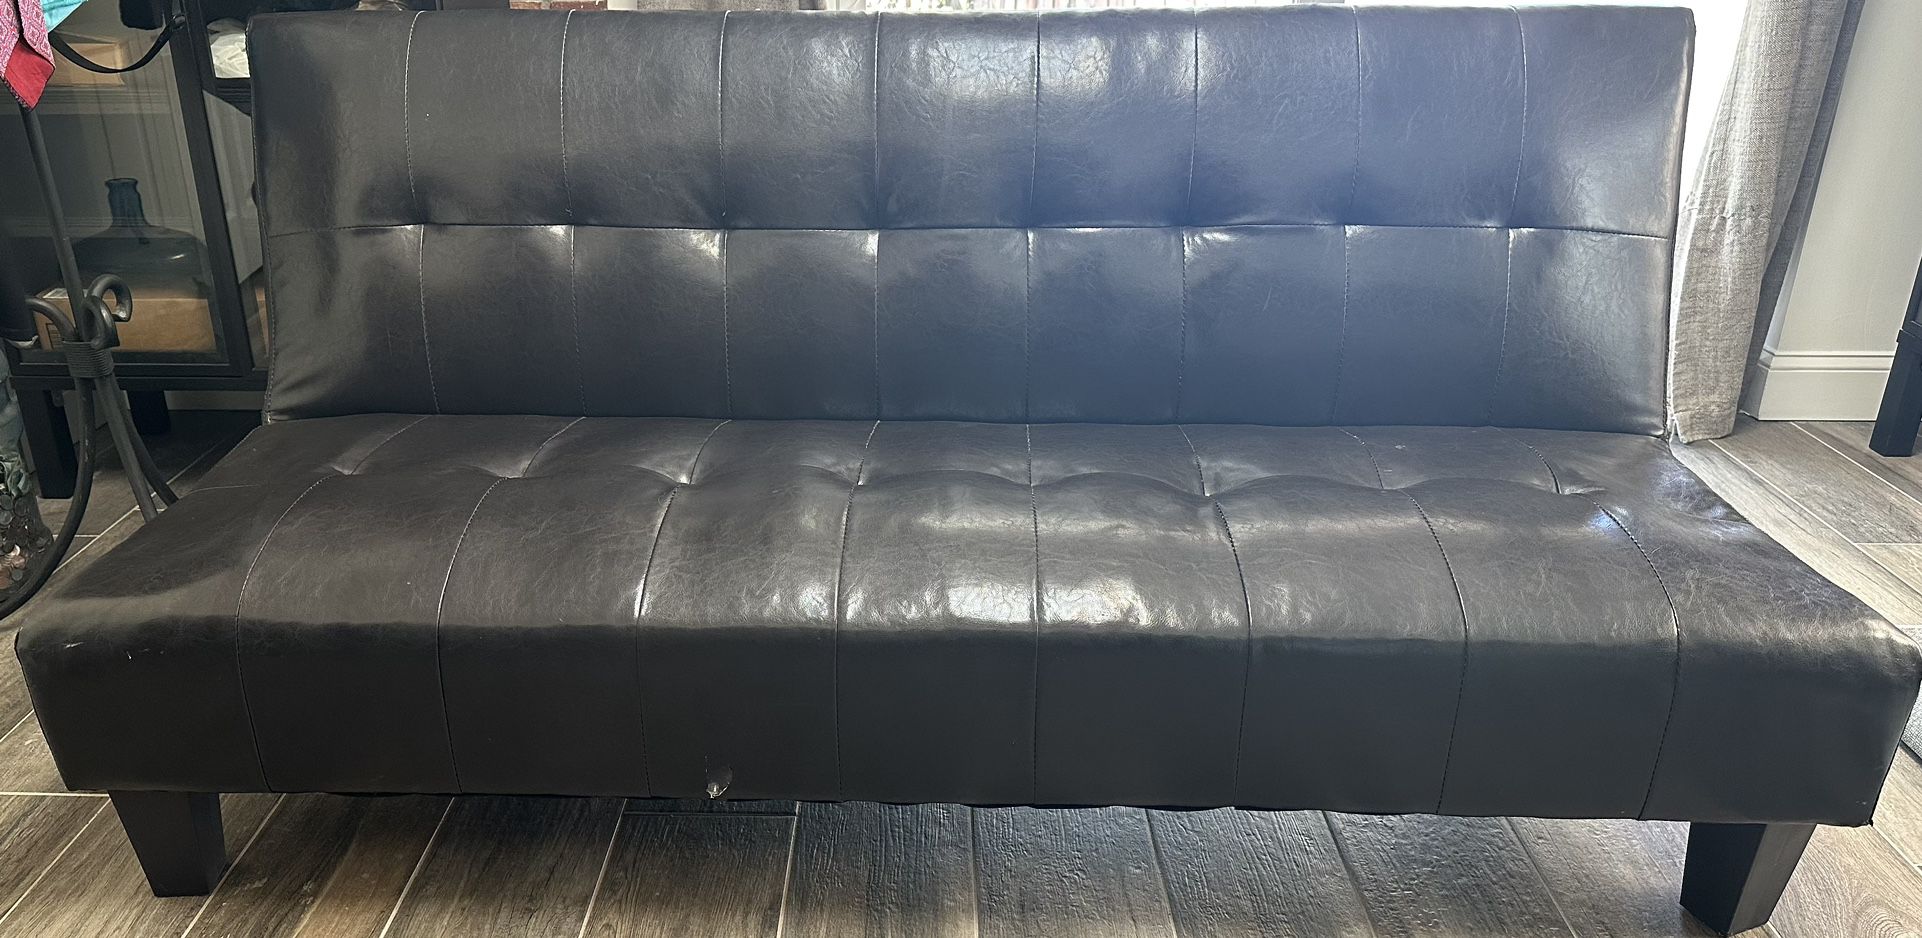 $50.00 Leather Futon SMALL TEAR Need Gone ASAP